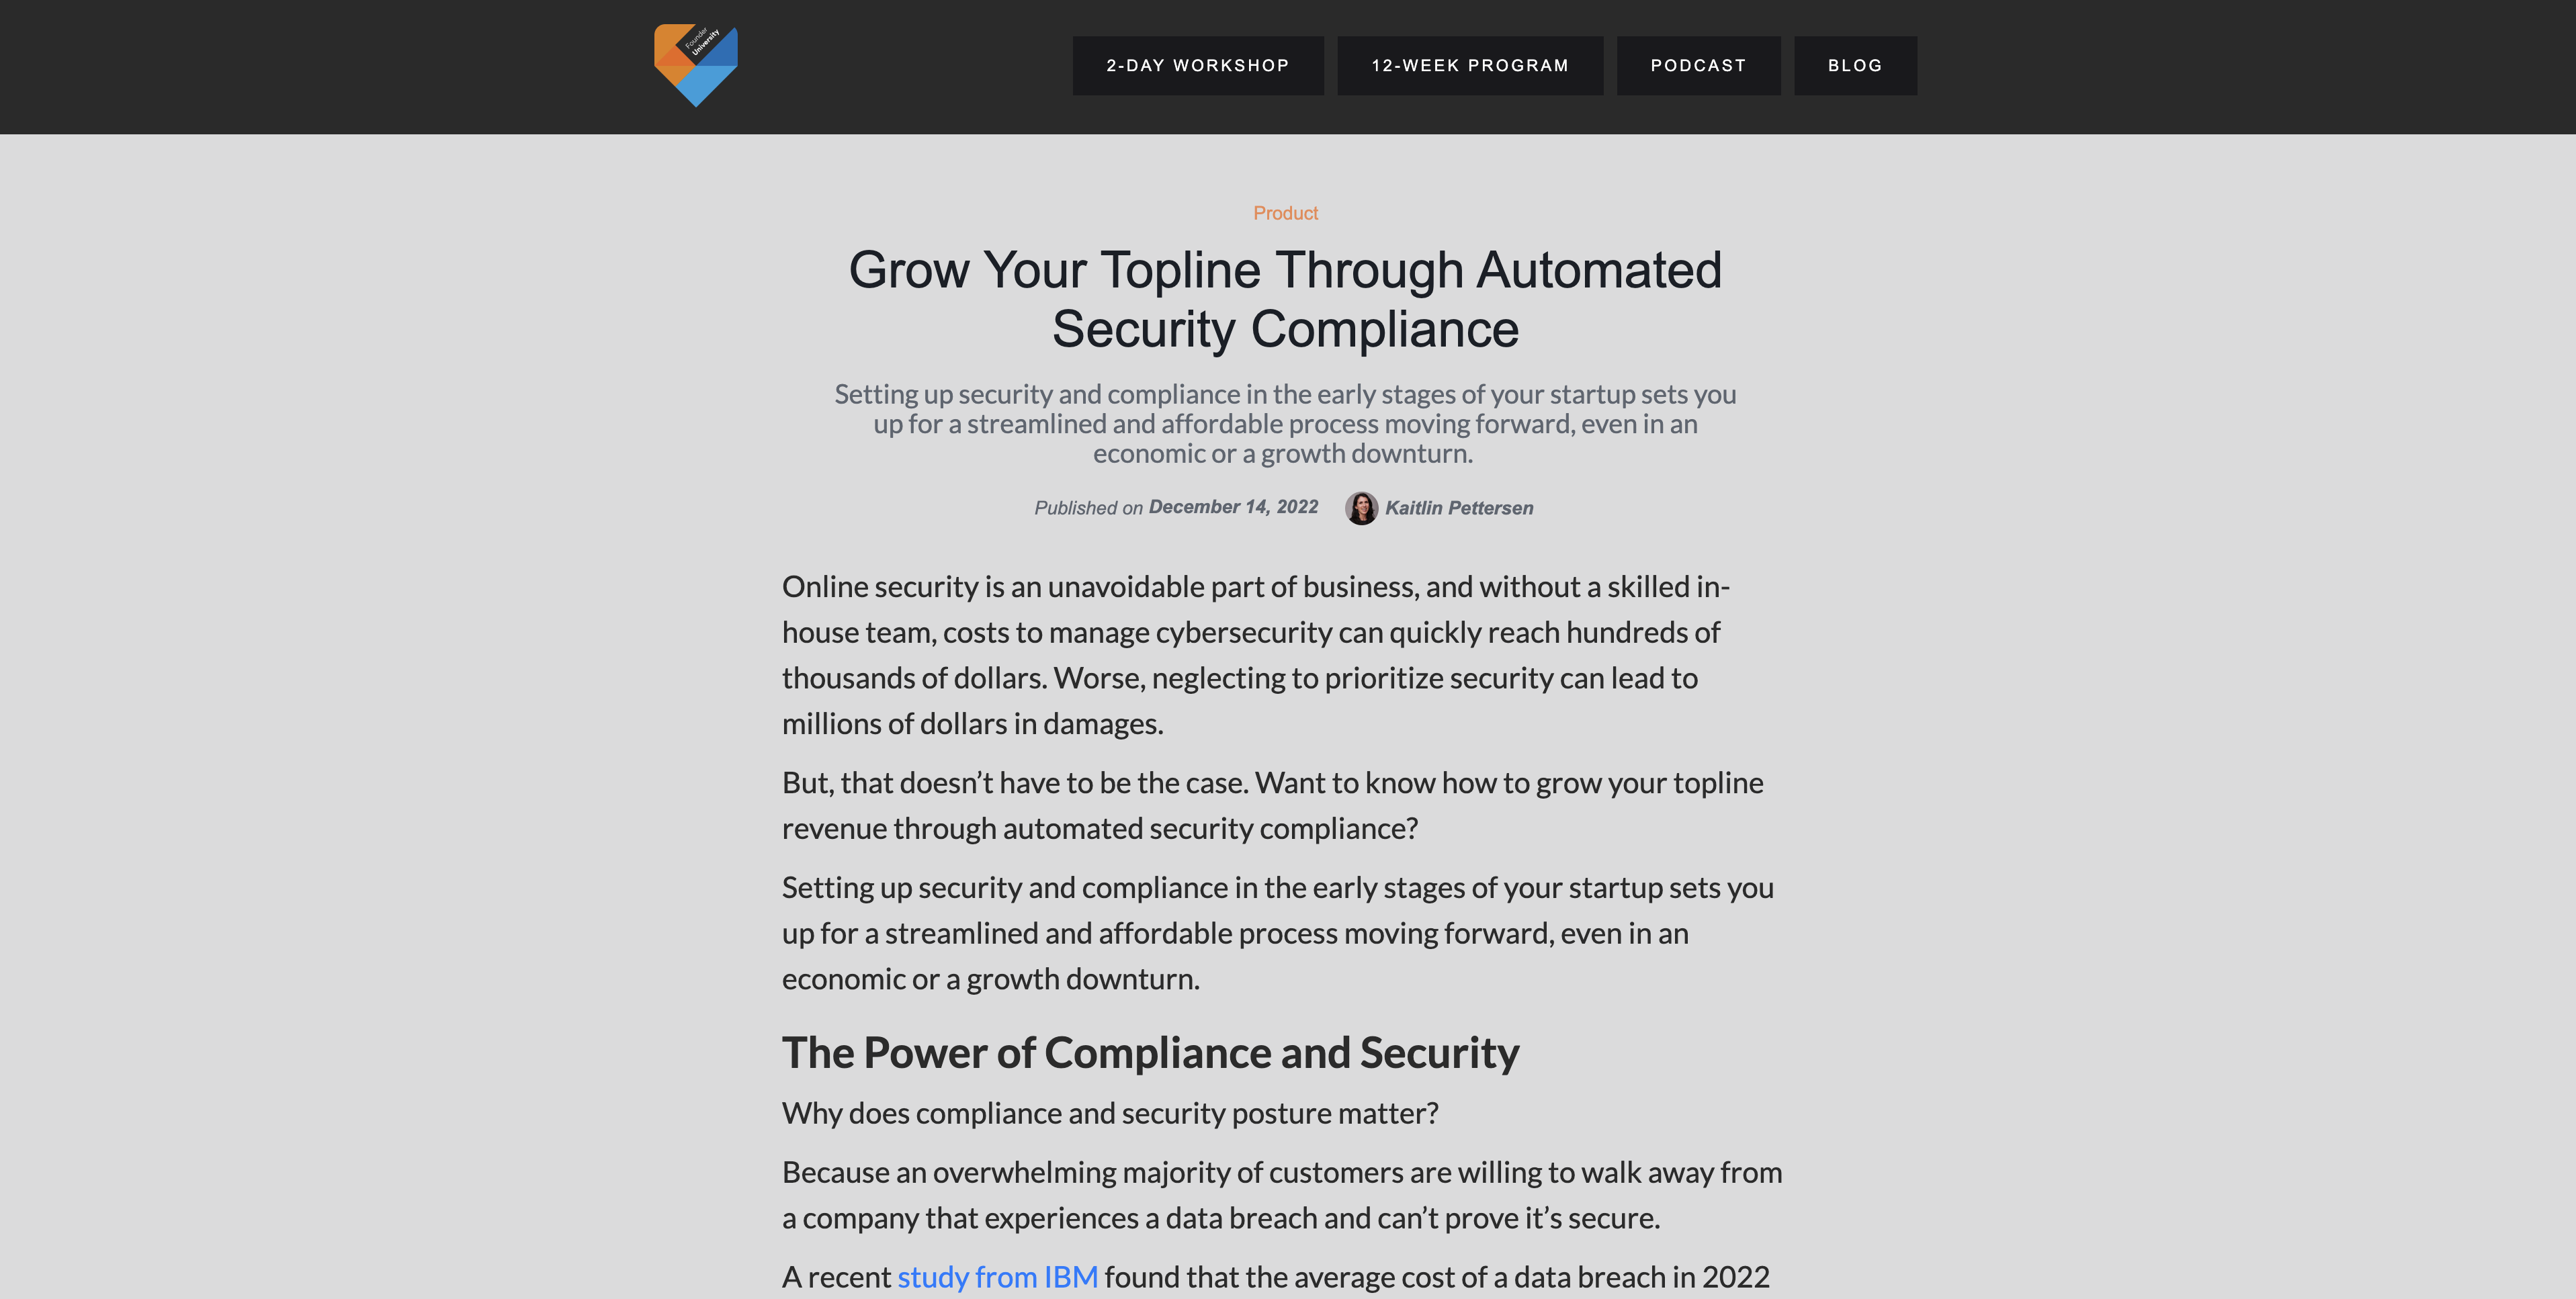 freelance content writer for saas companies writing samples - security compliance